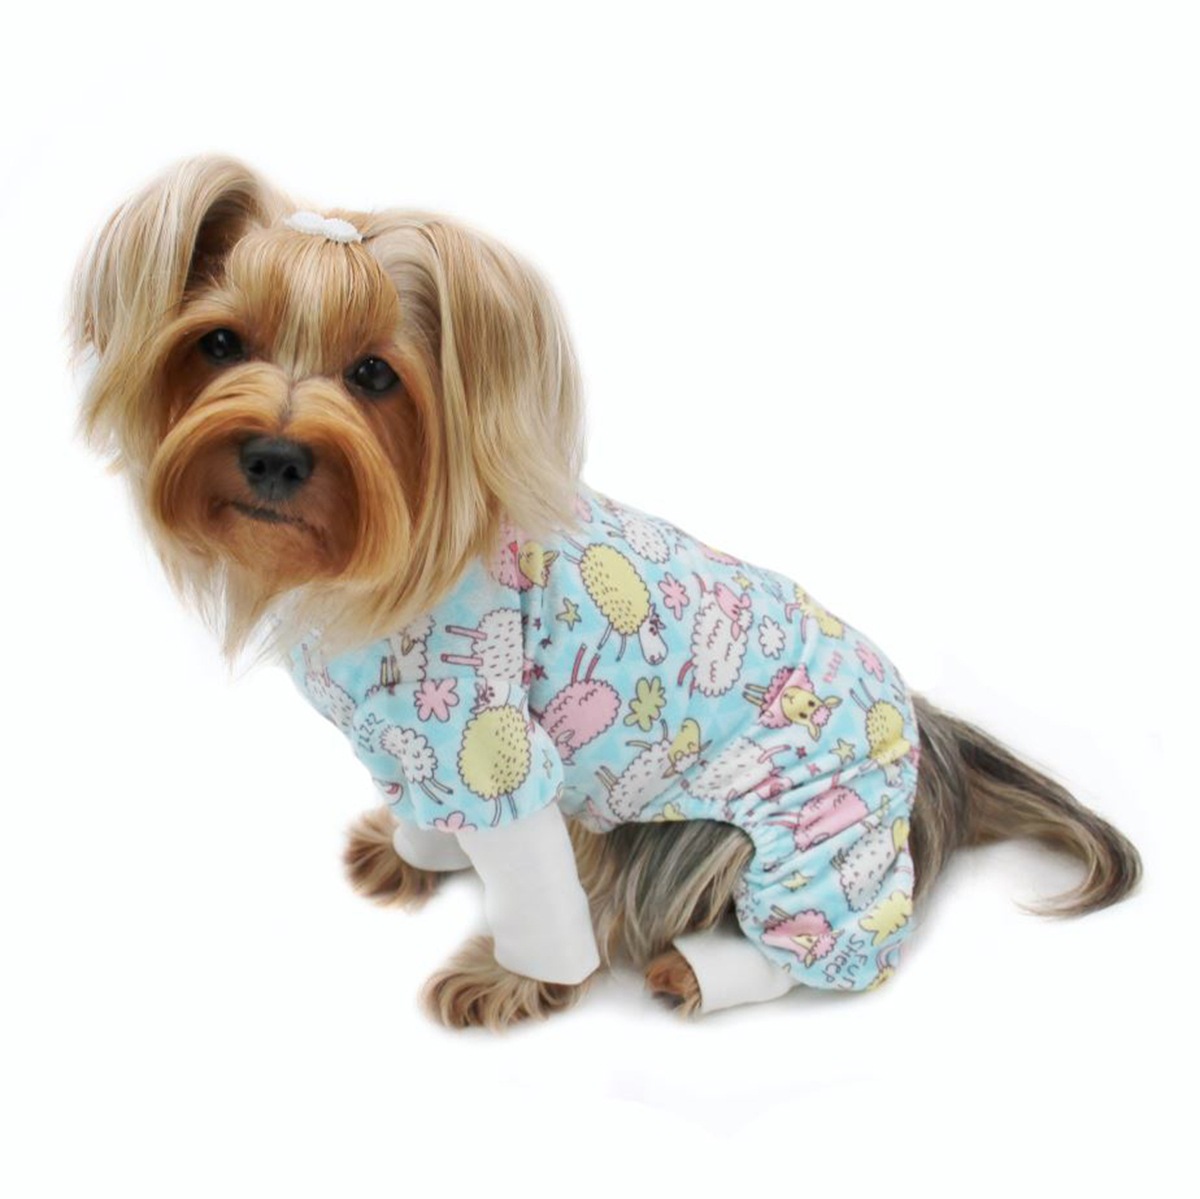 Ultra Soft Minky Funny Sheep Pajamas For Dogs » Pampered Paw Gifts